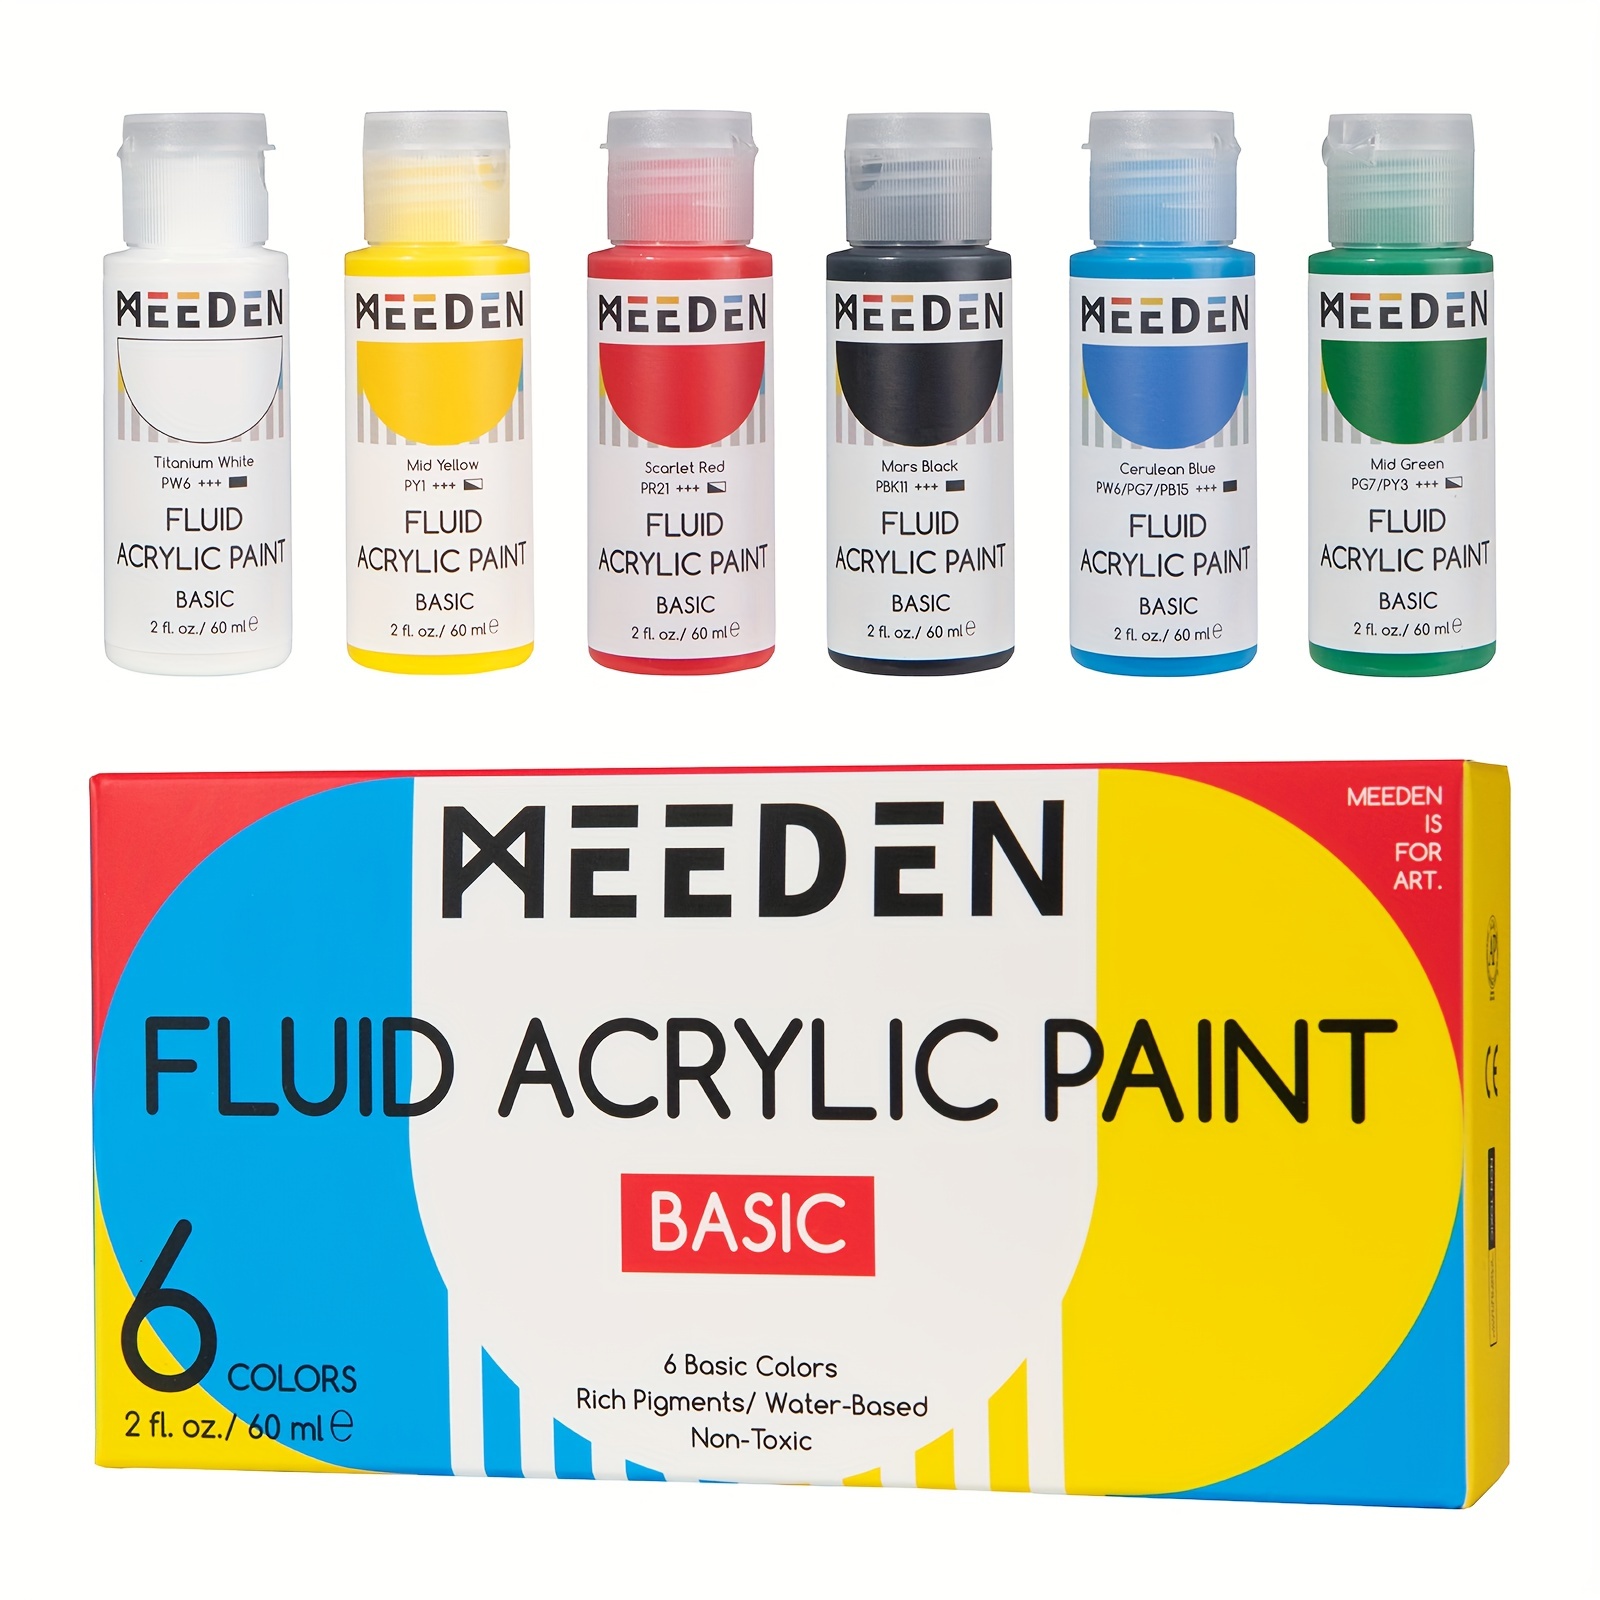 Acrylic Paint Set 24 Colors With 2 Canvases - Acrylic Paint Kit 2fl oz  Bottles, Rich Pigmented, Matte Finish and Smooth Application Professional